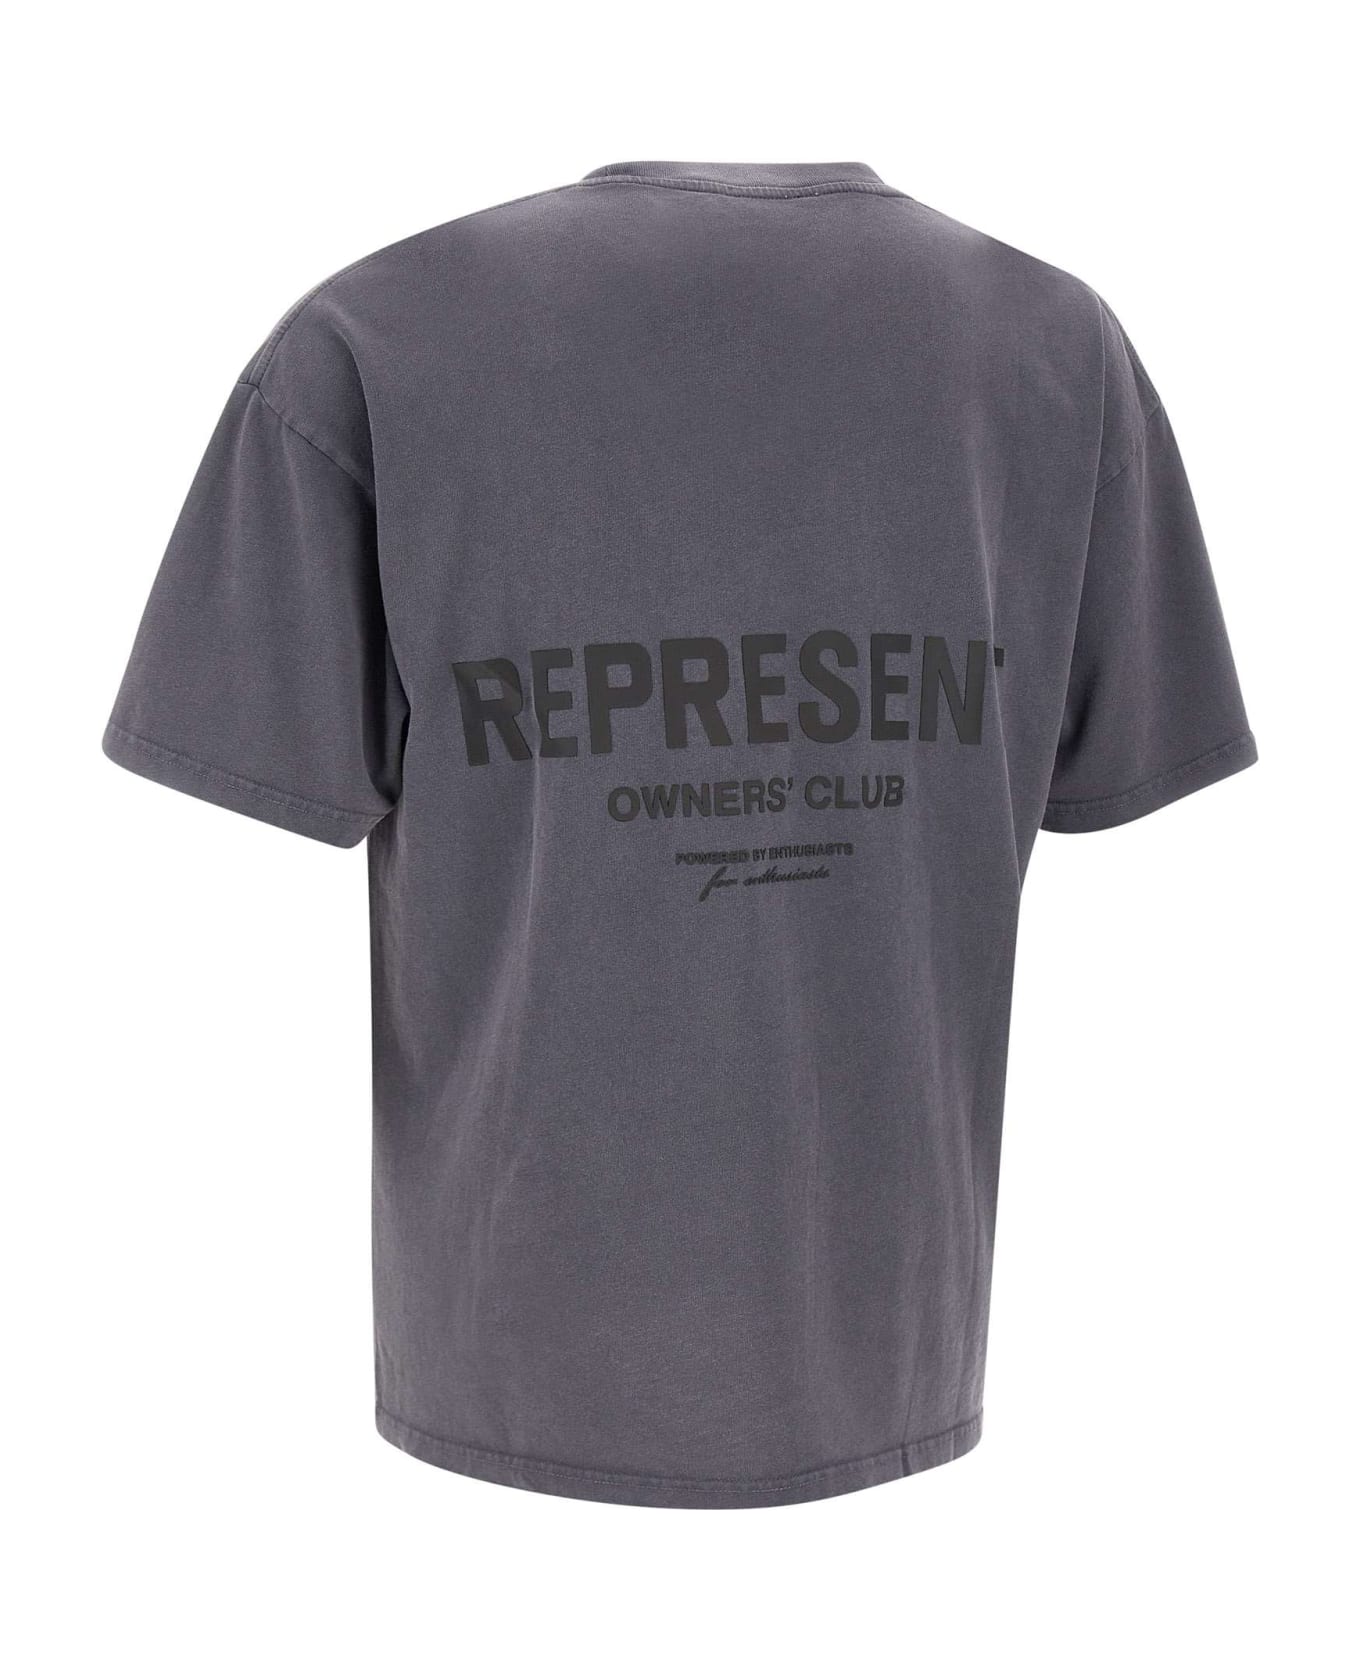 REPRESENT "owners Club" Cotton T-shirt - GREY